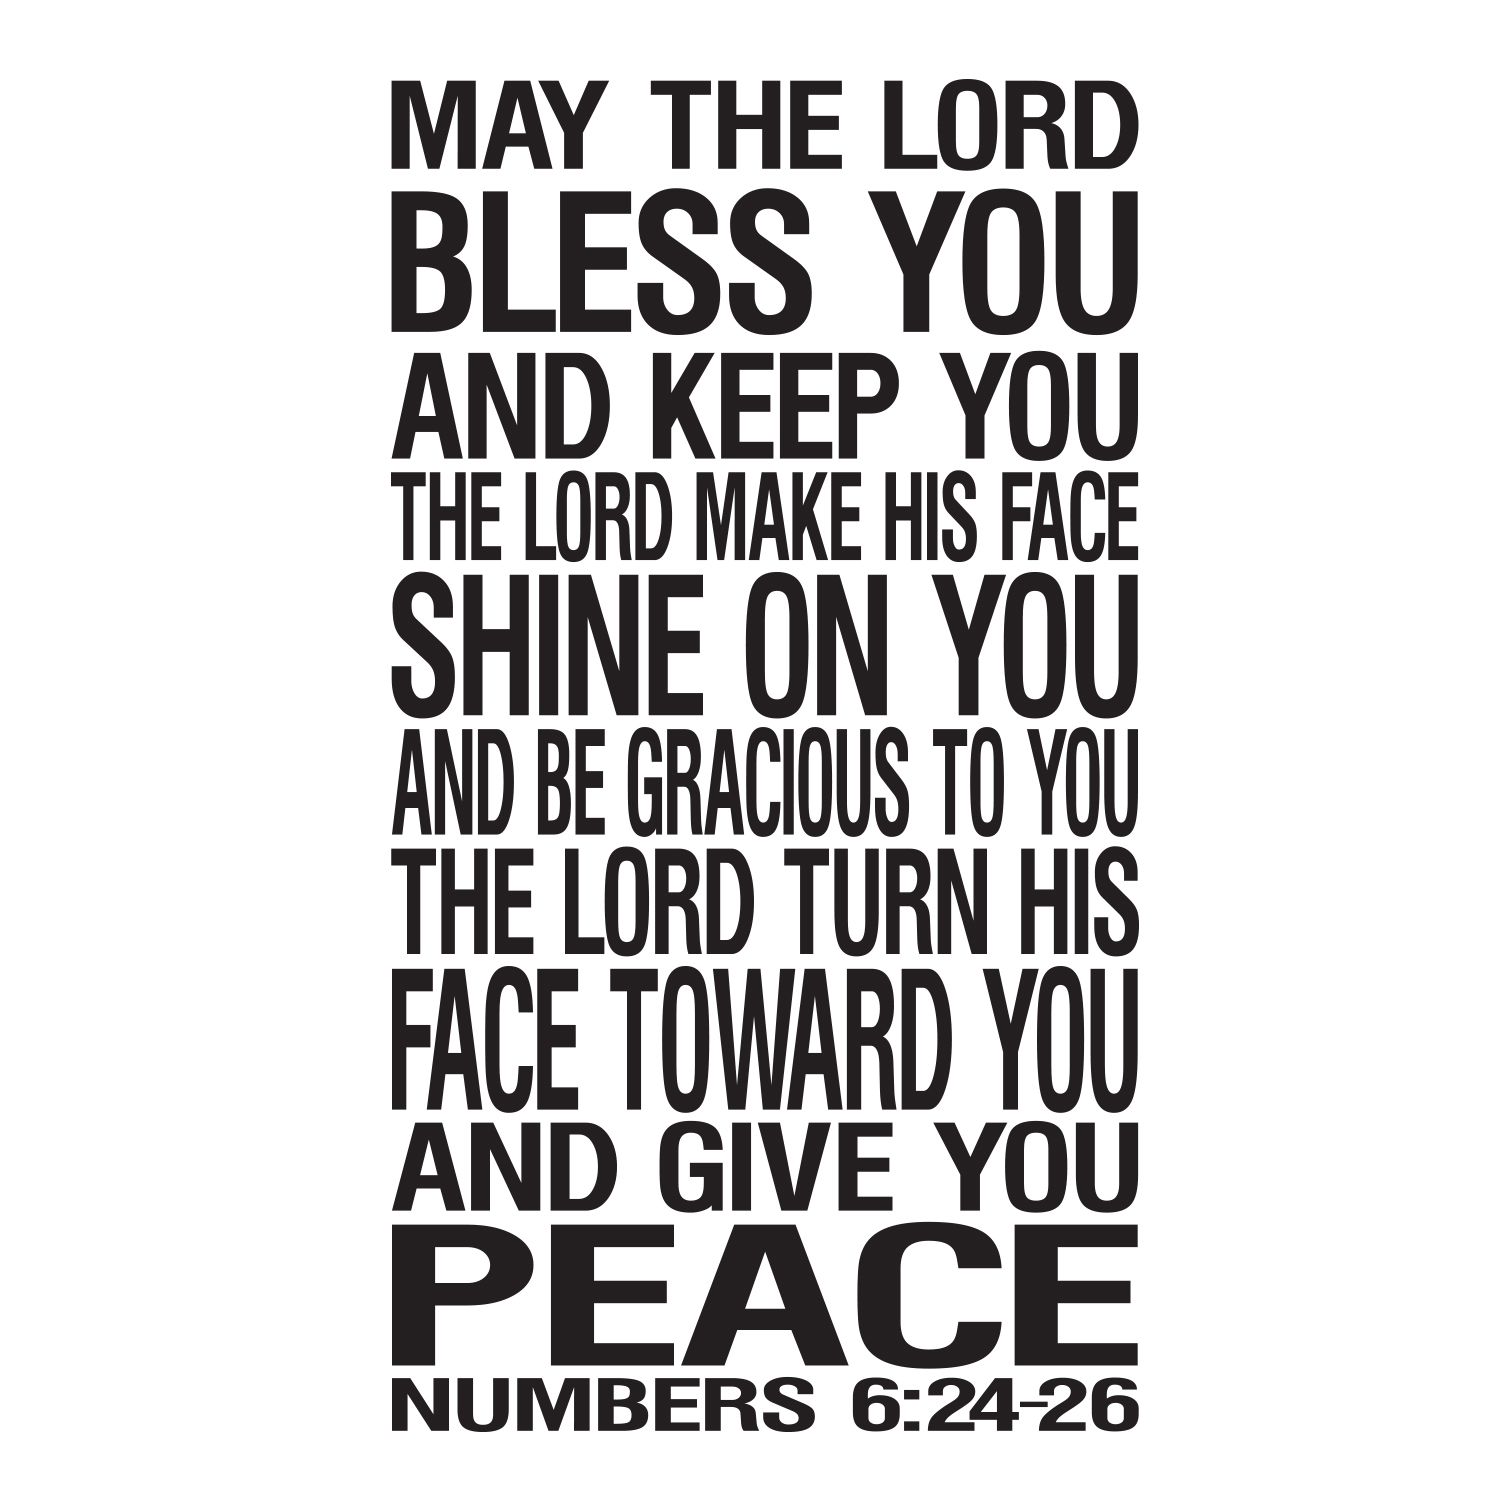 the lord bless you and keep you